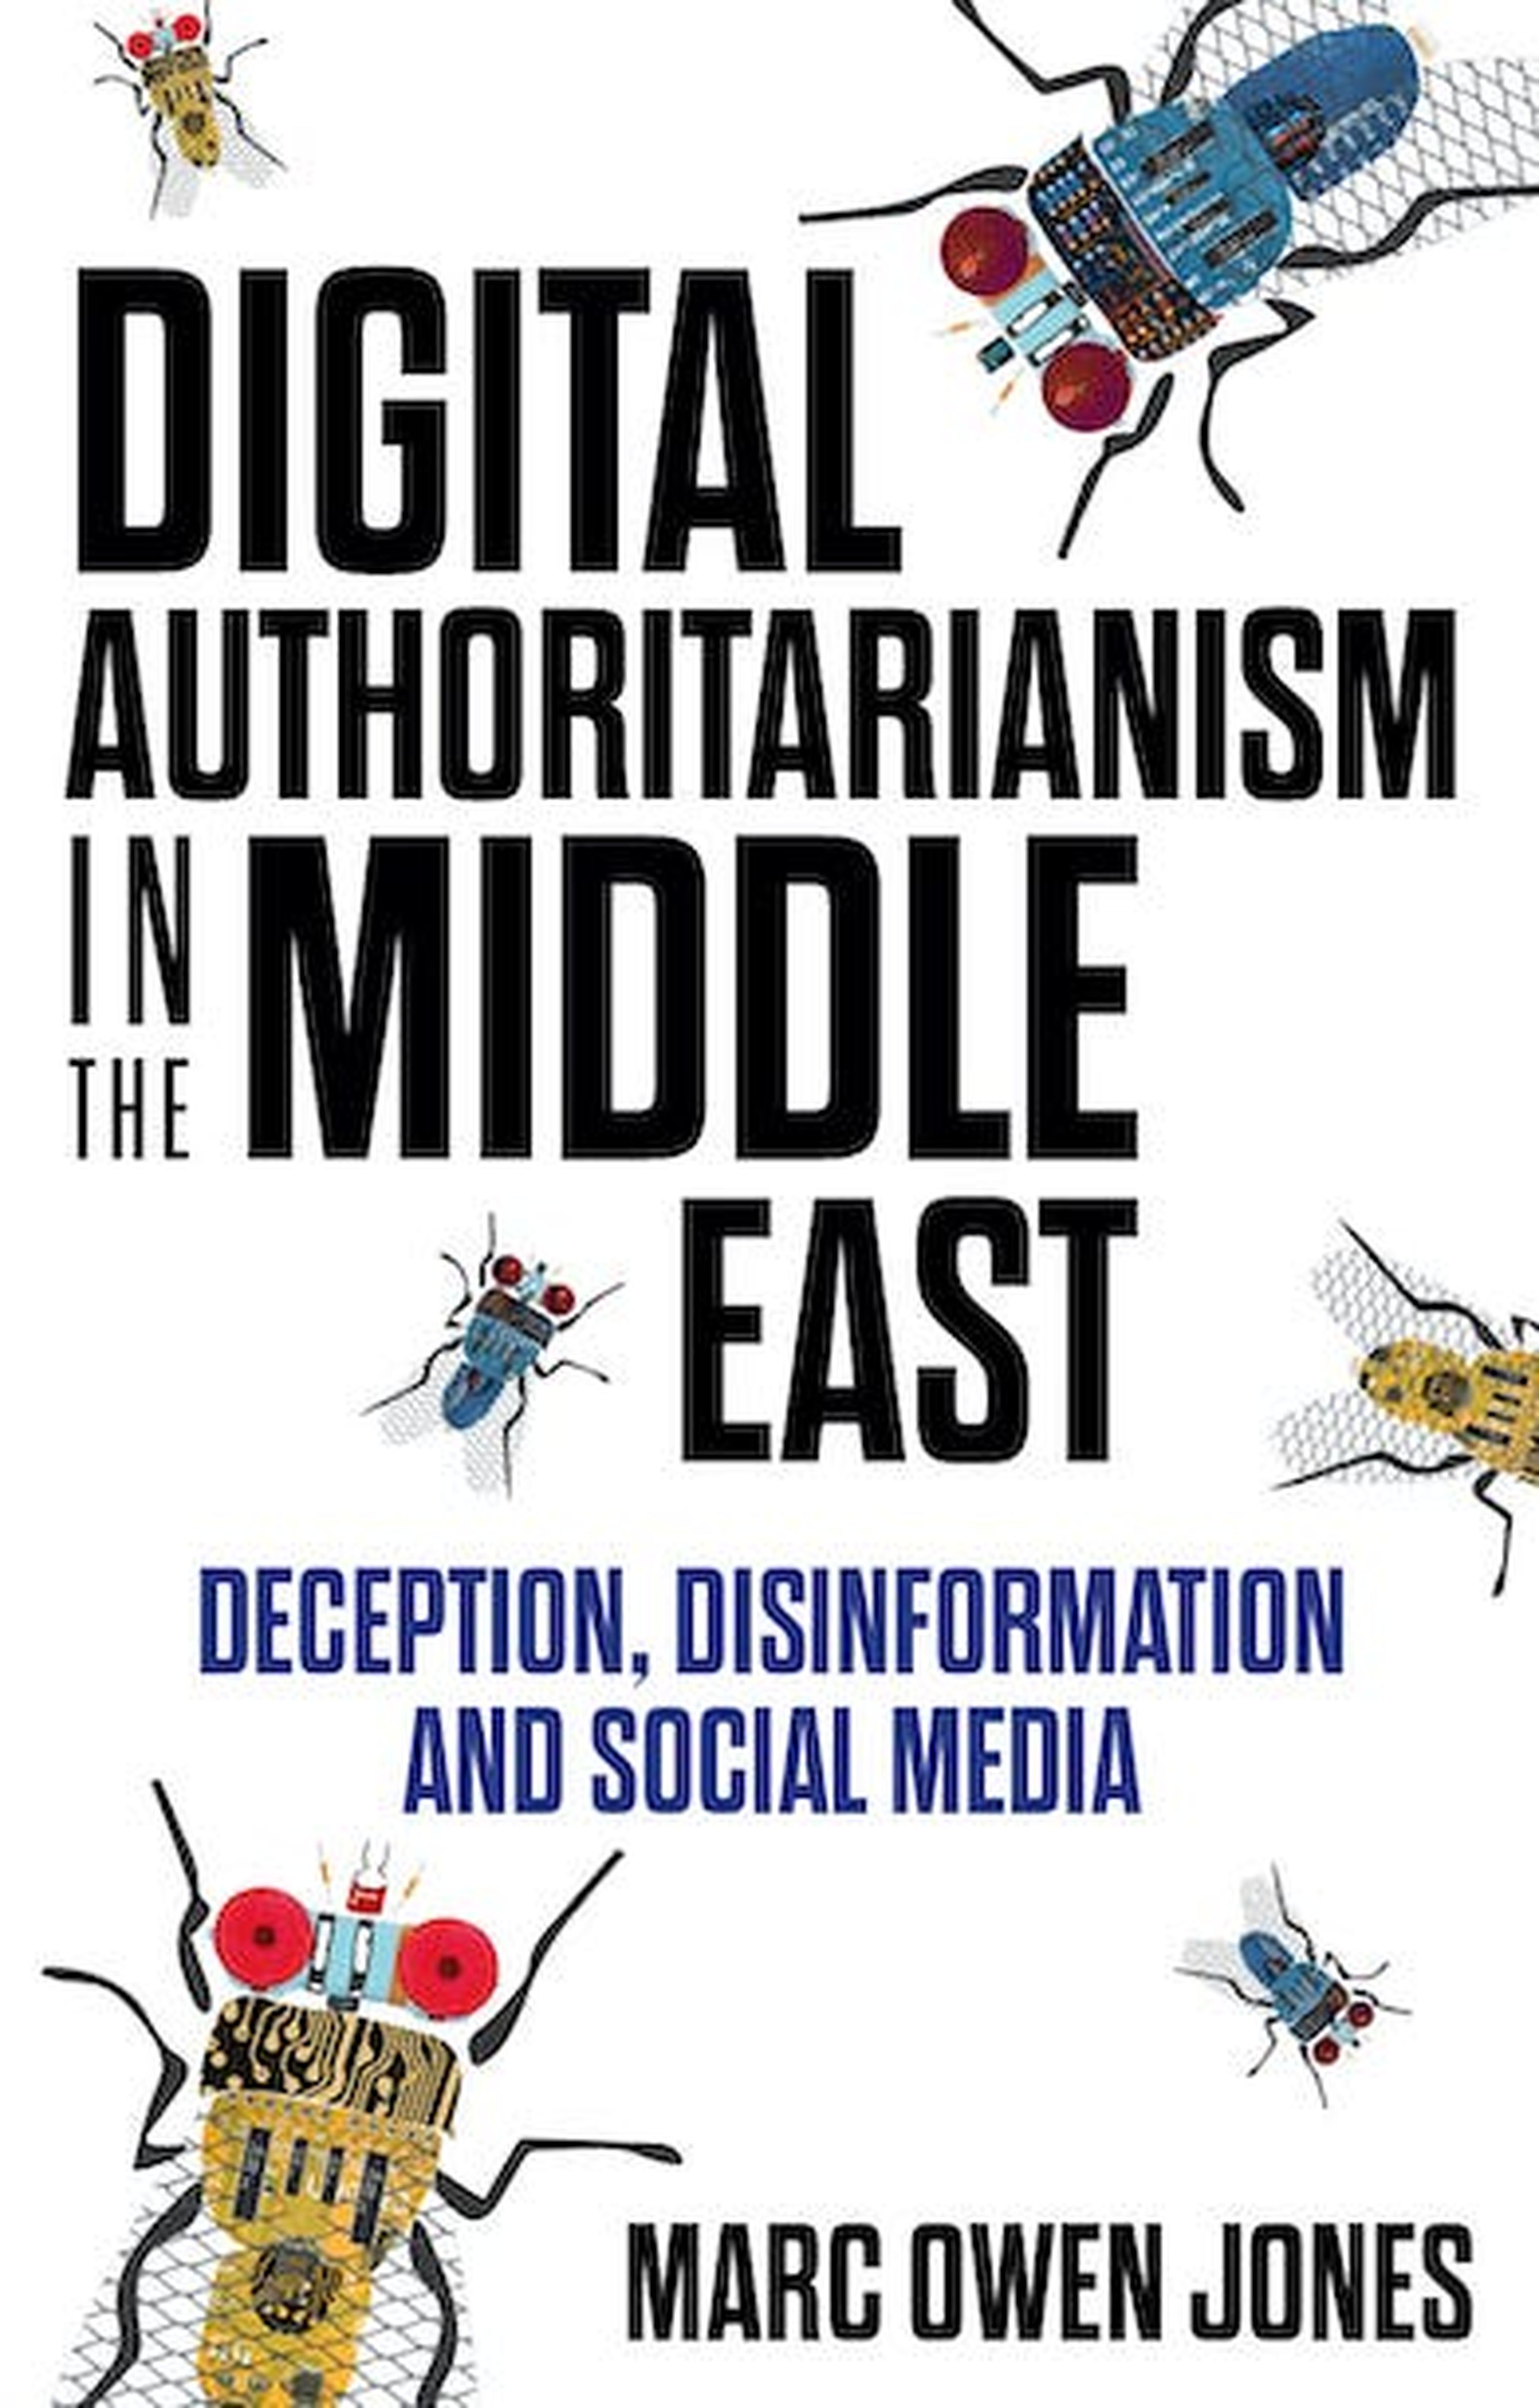 'Digital Authoritarianism in the Middle East: Deception, Disinformation and Social Media'